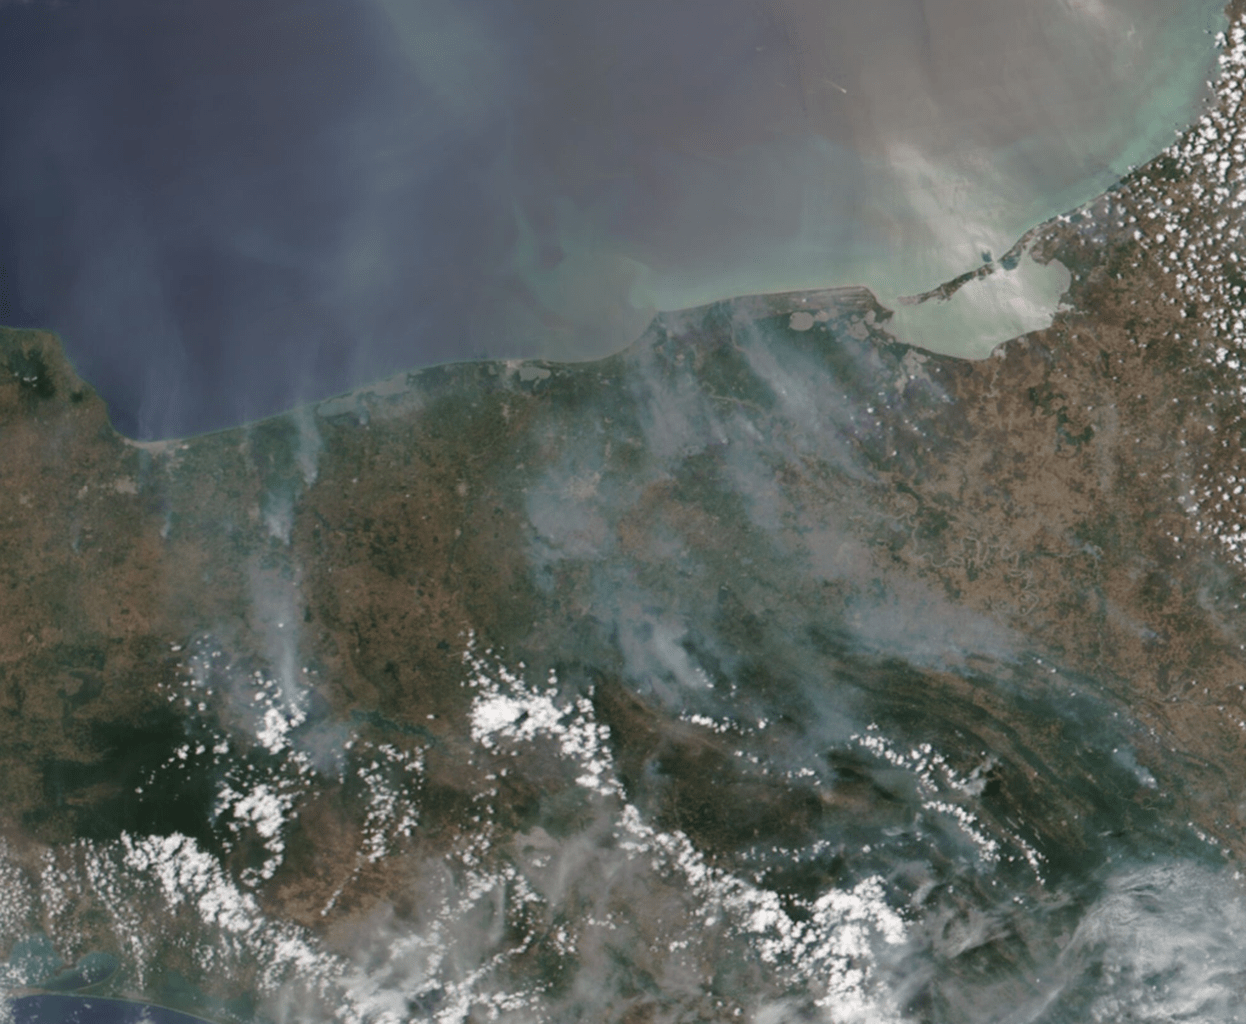 An image from space showing fires burning in Mexico.